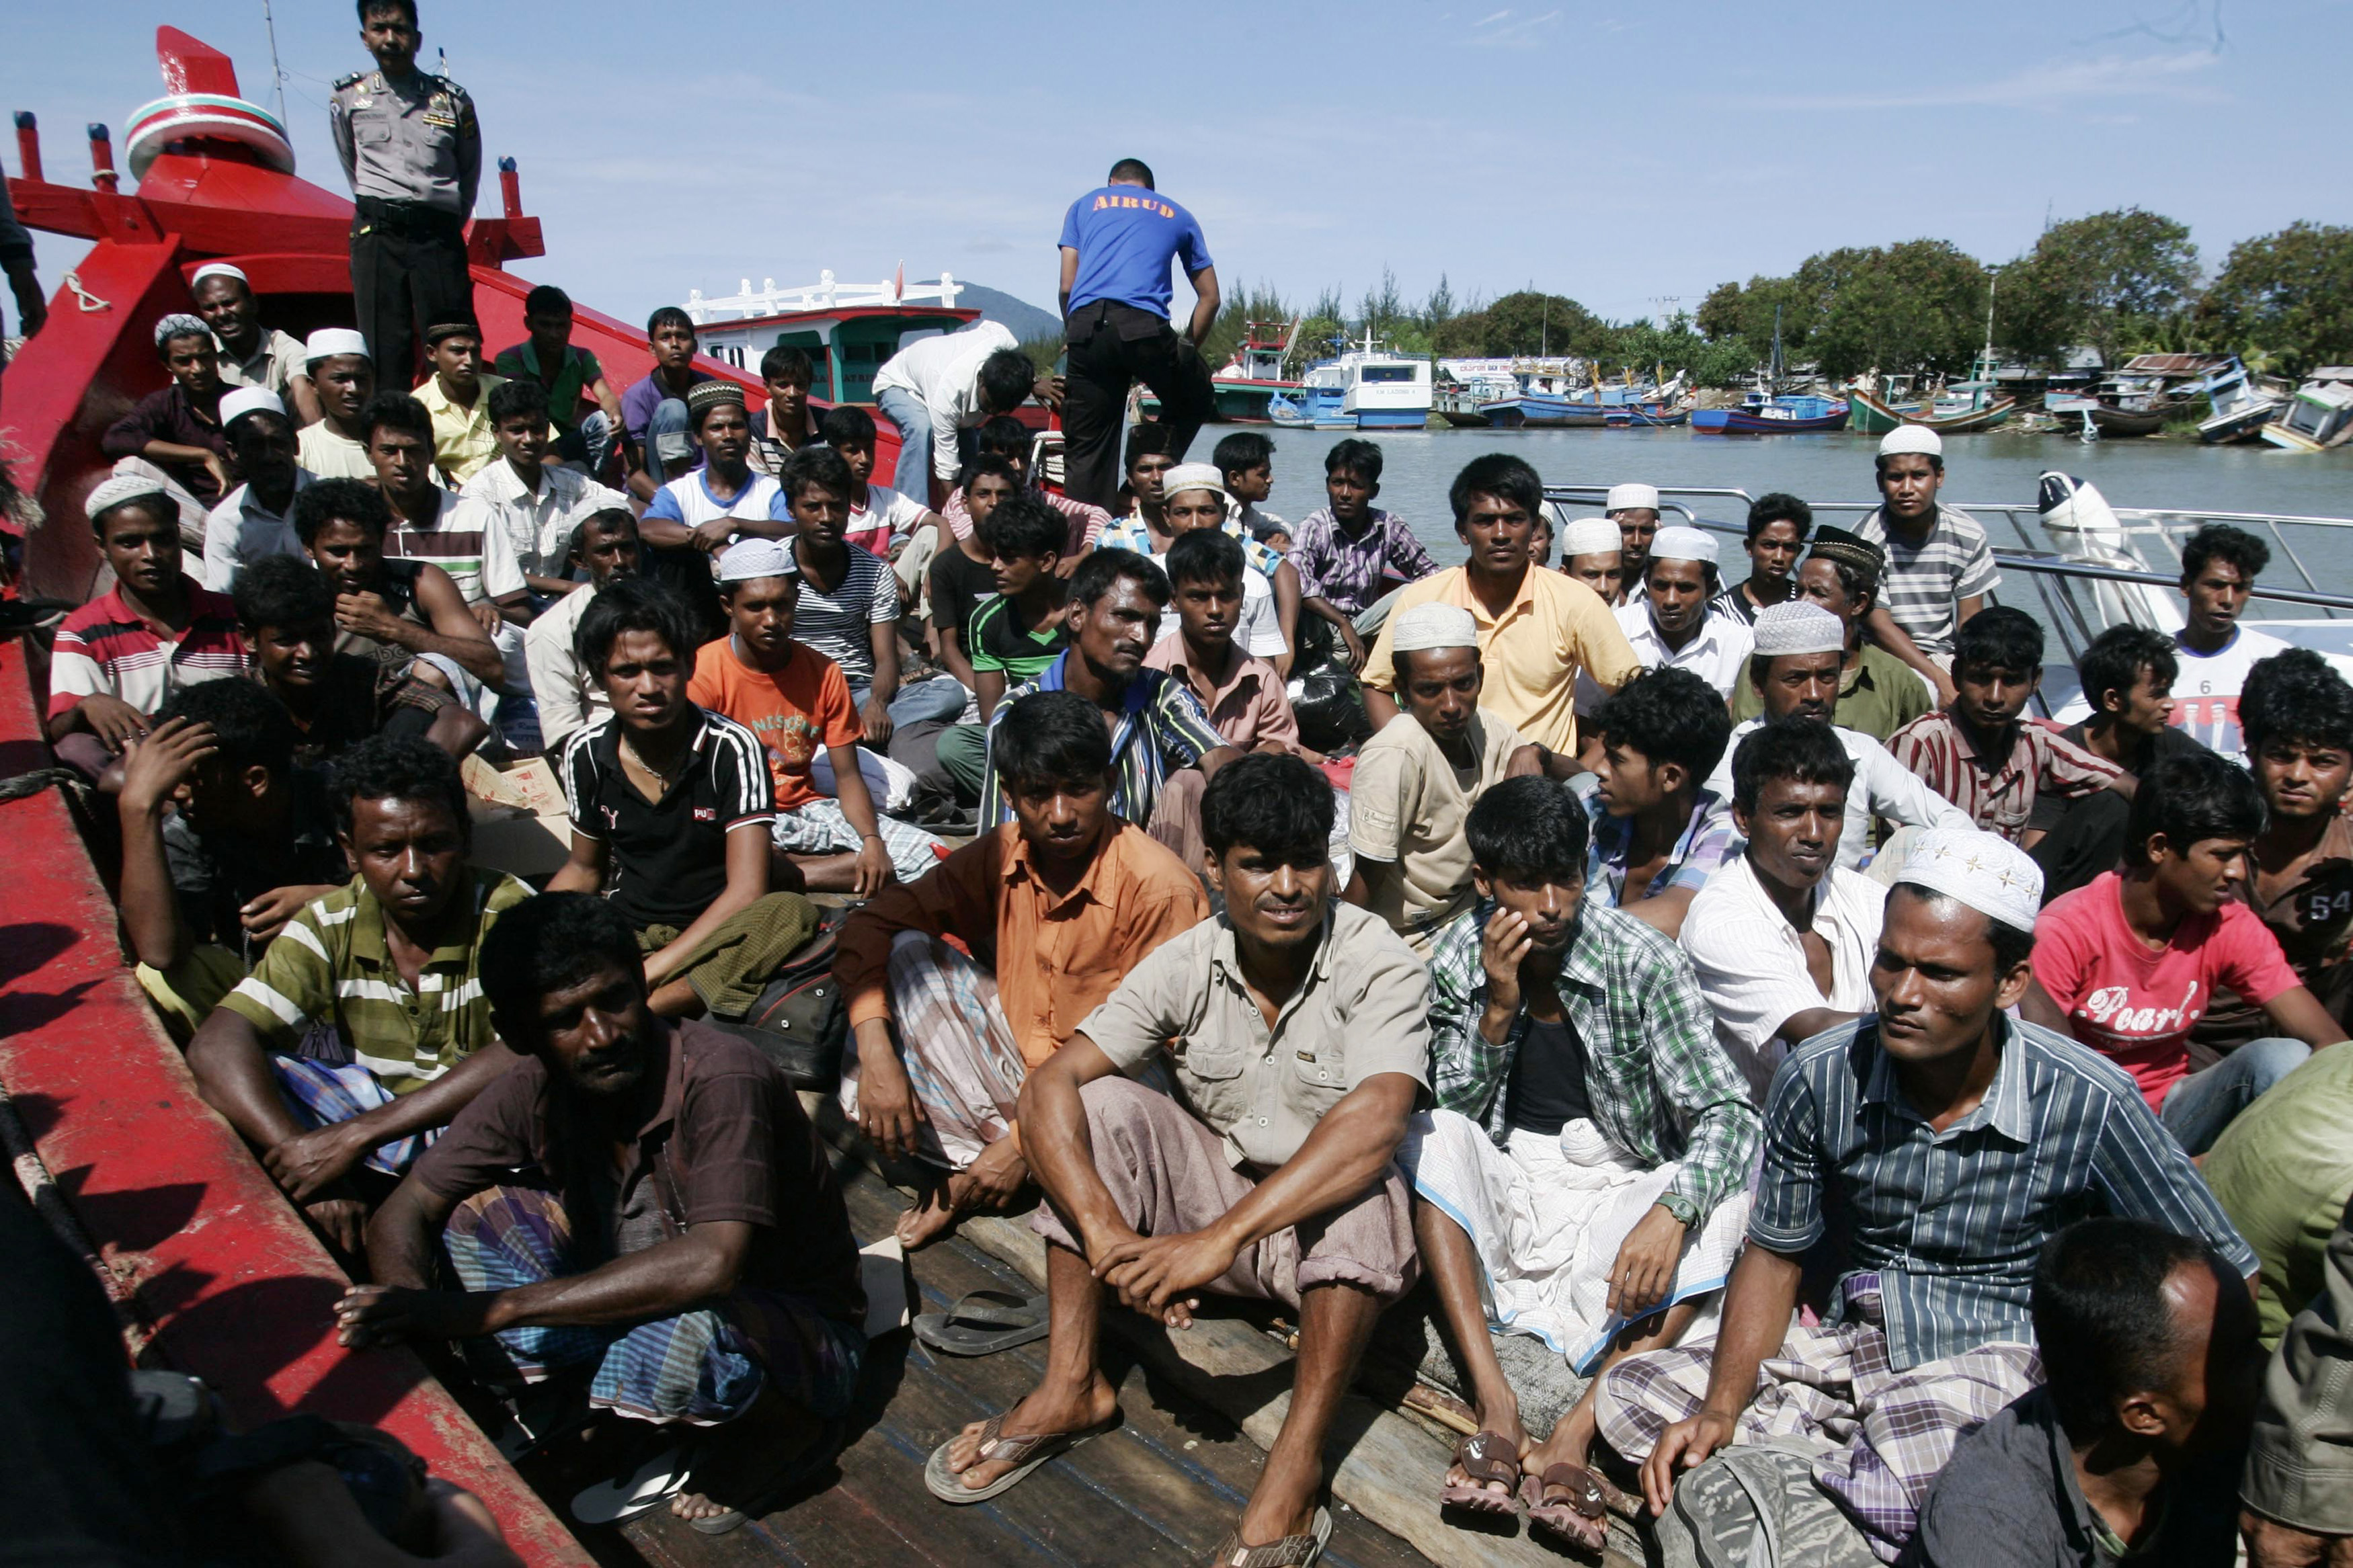 Ethnic Rohingya refugees from Myanmar sit on a wooden boat as they wait for transportation to a temporary shelter in Aceh Besar after arriving at Lampulo habour